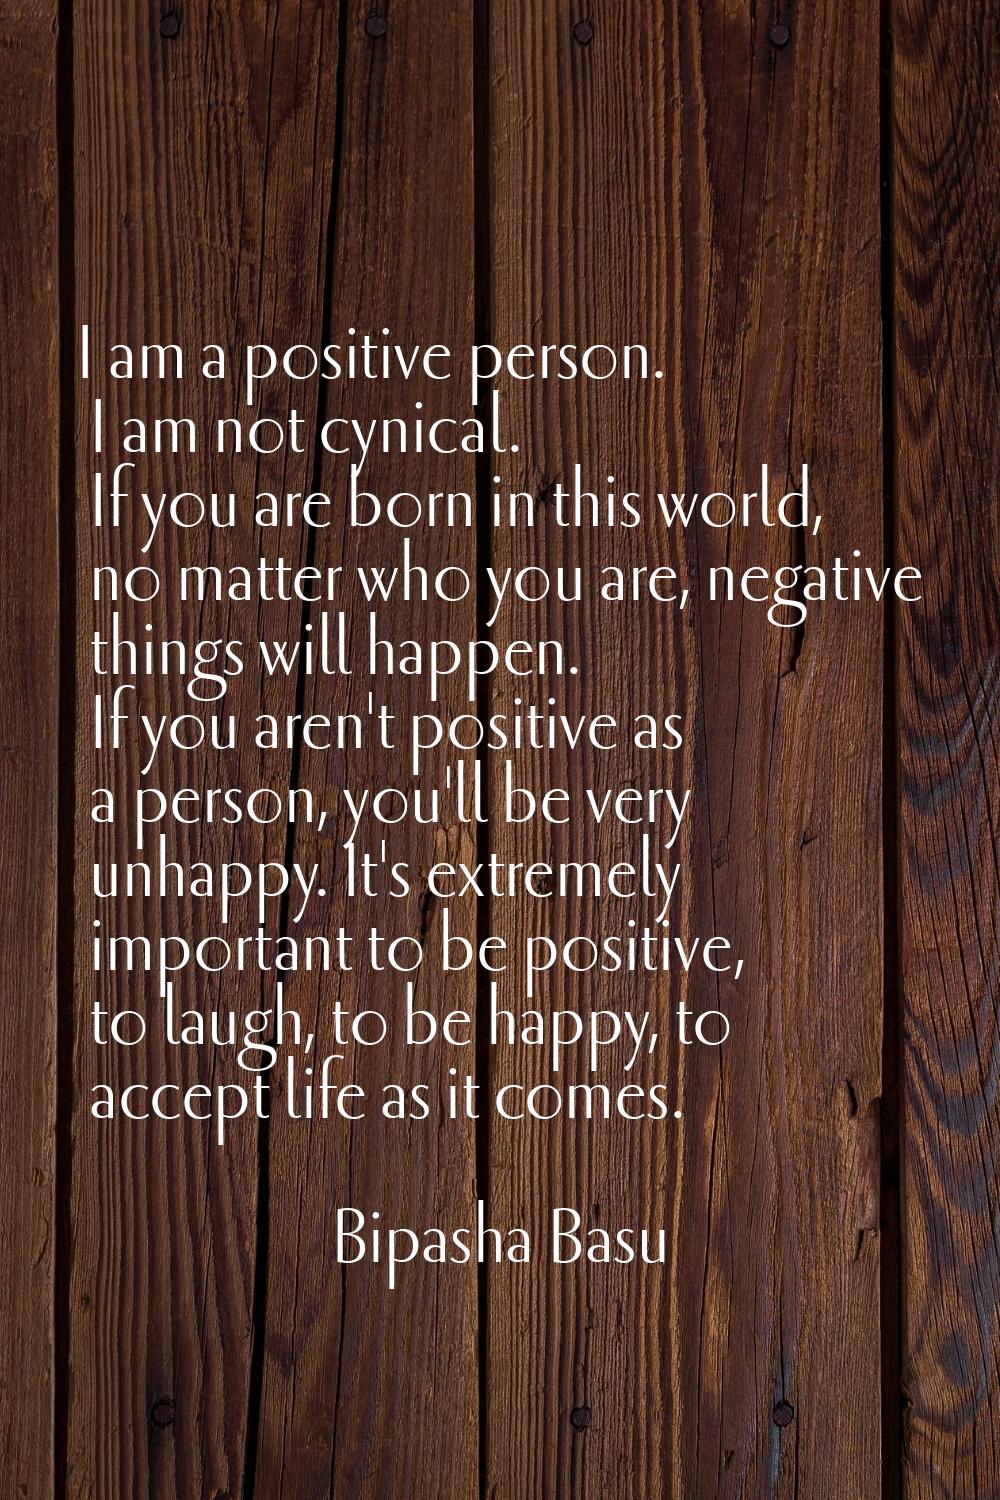 I am a positive person. I am not cynical. If you are born in this world, no matter who you are, neg